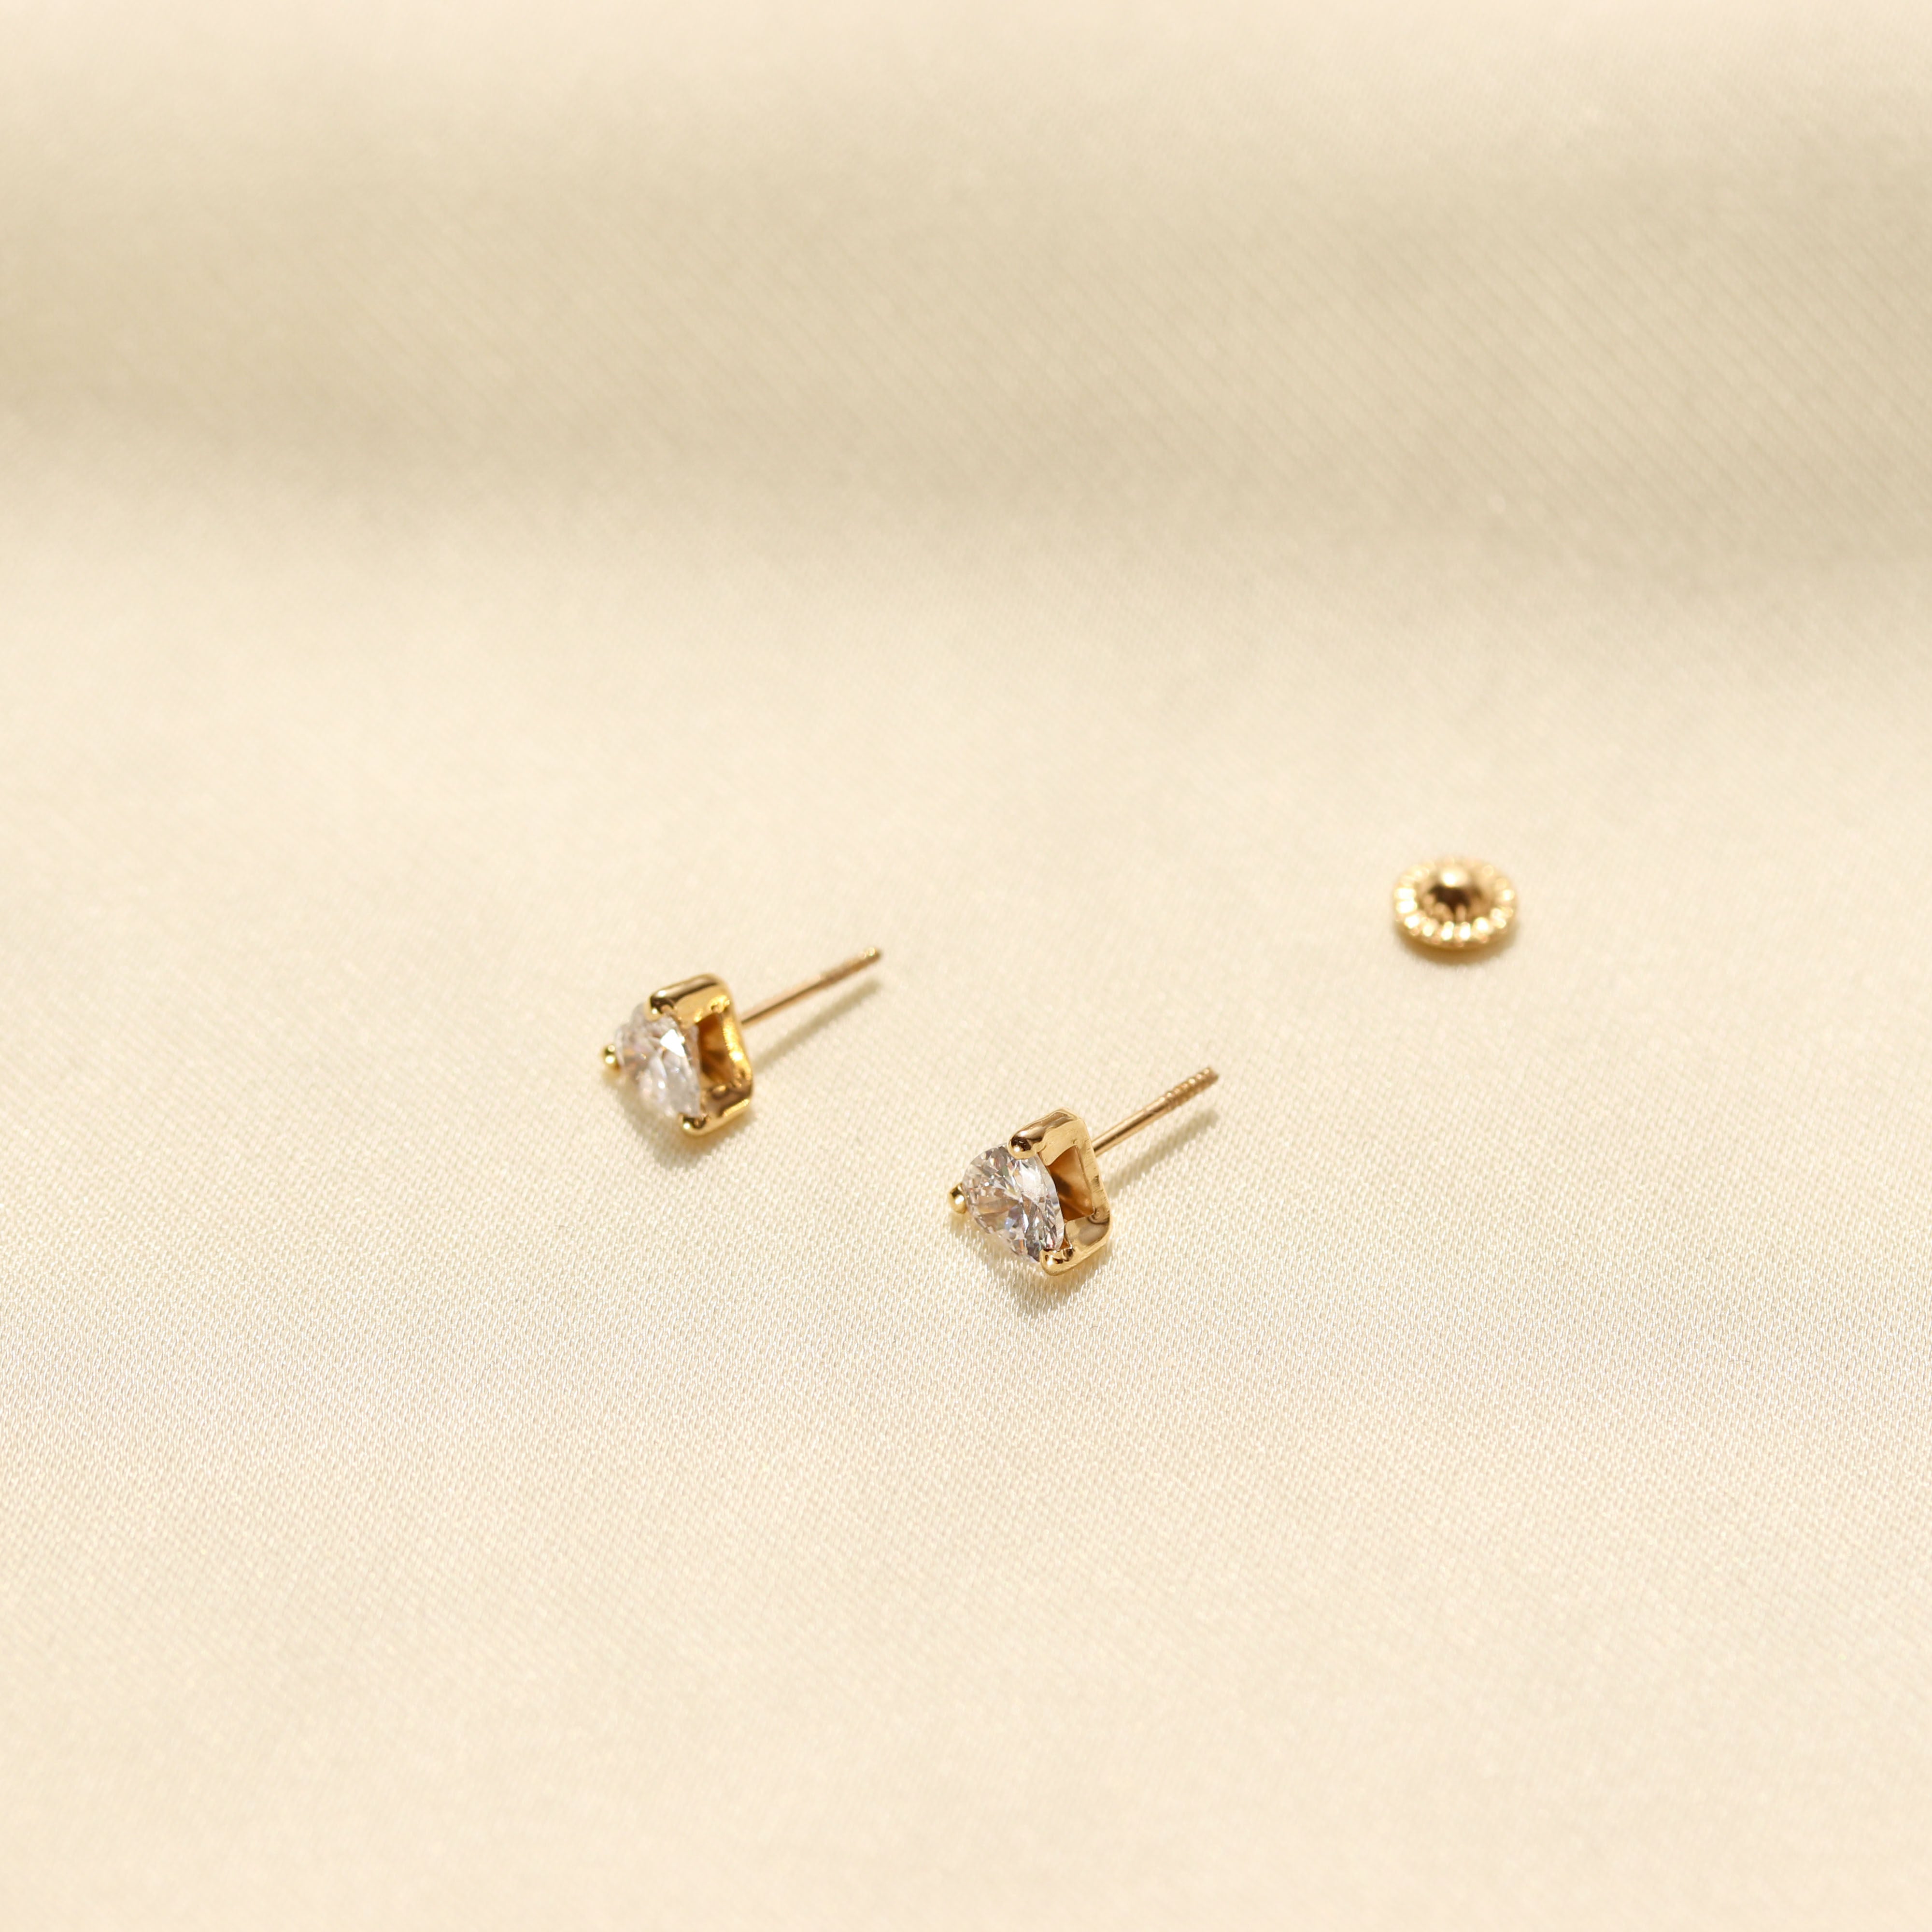 Big Studs antique | New gold jewellery designs, Gold jewelry stores, Gold  bridal earrings